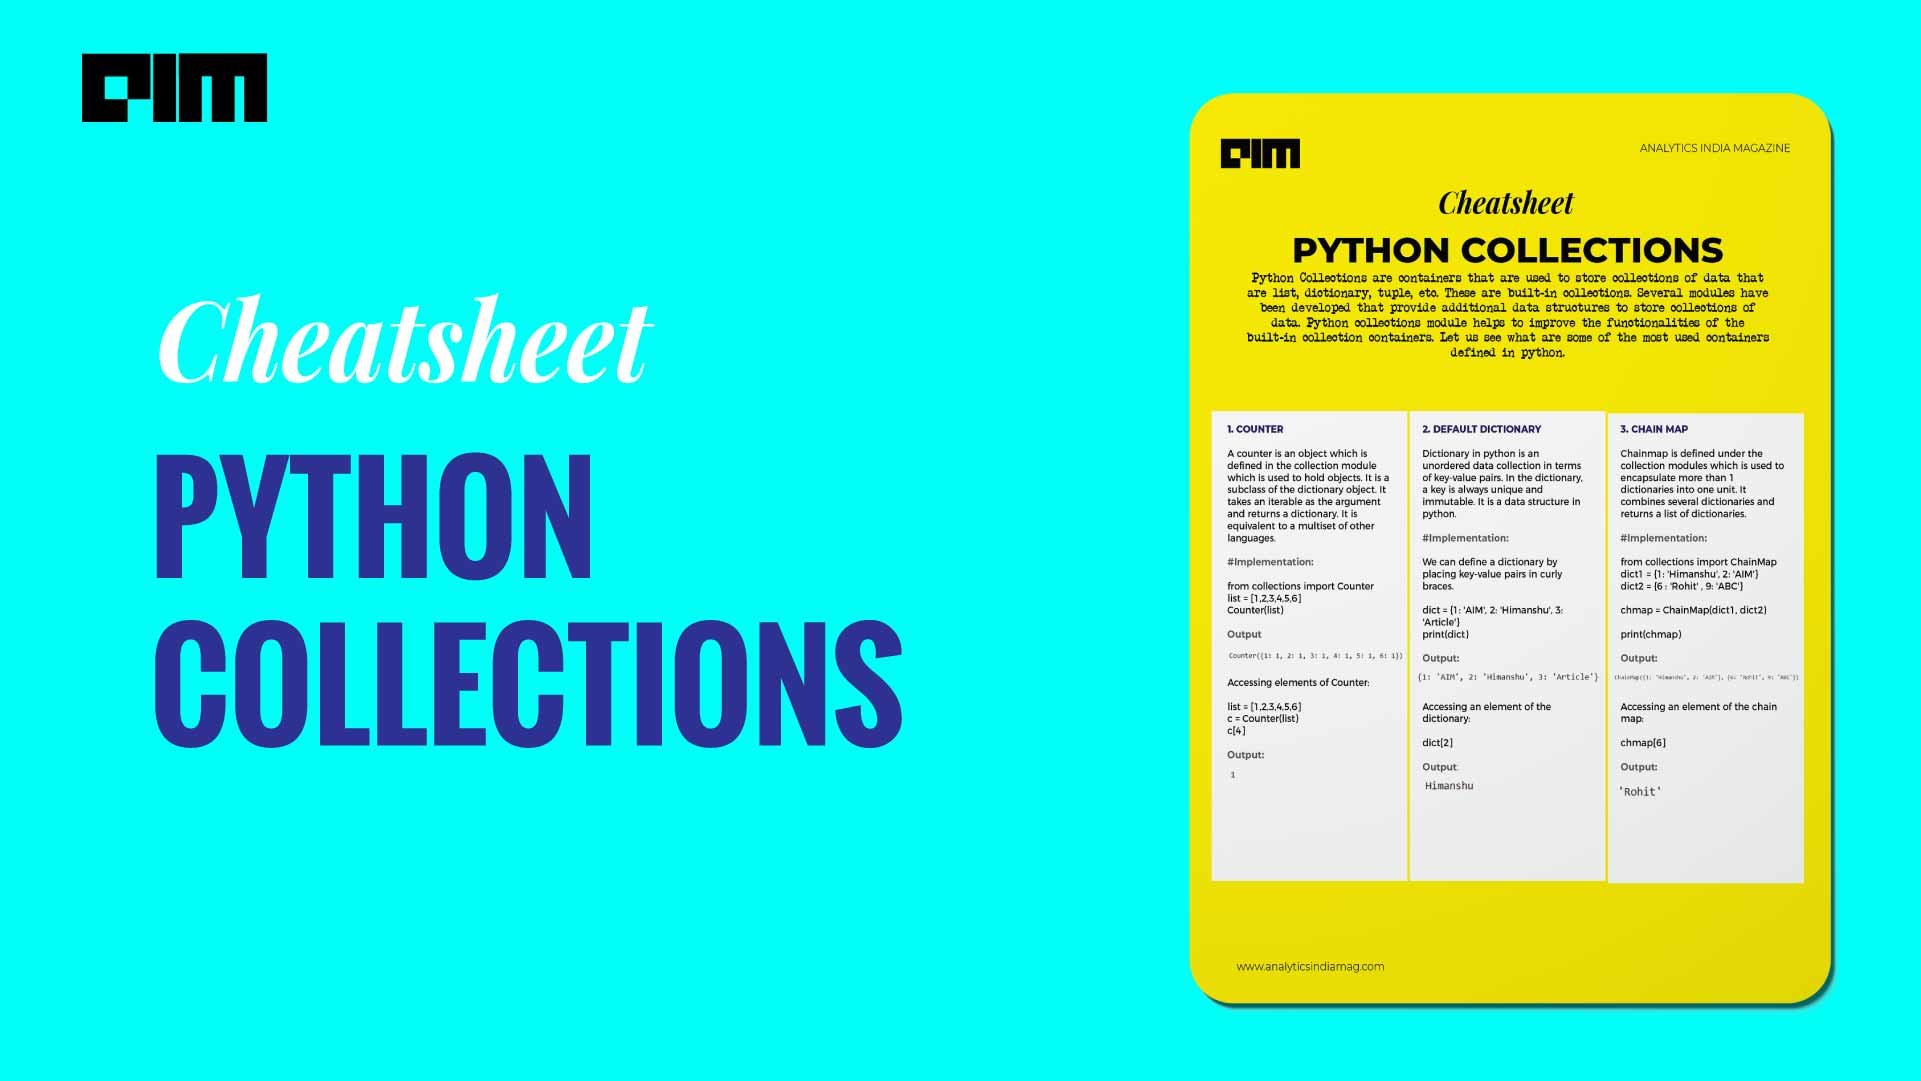 collections in python 3